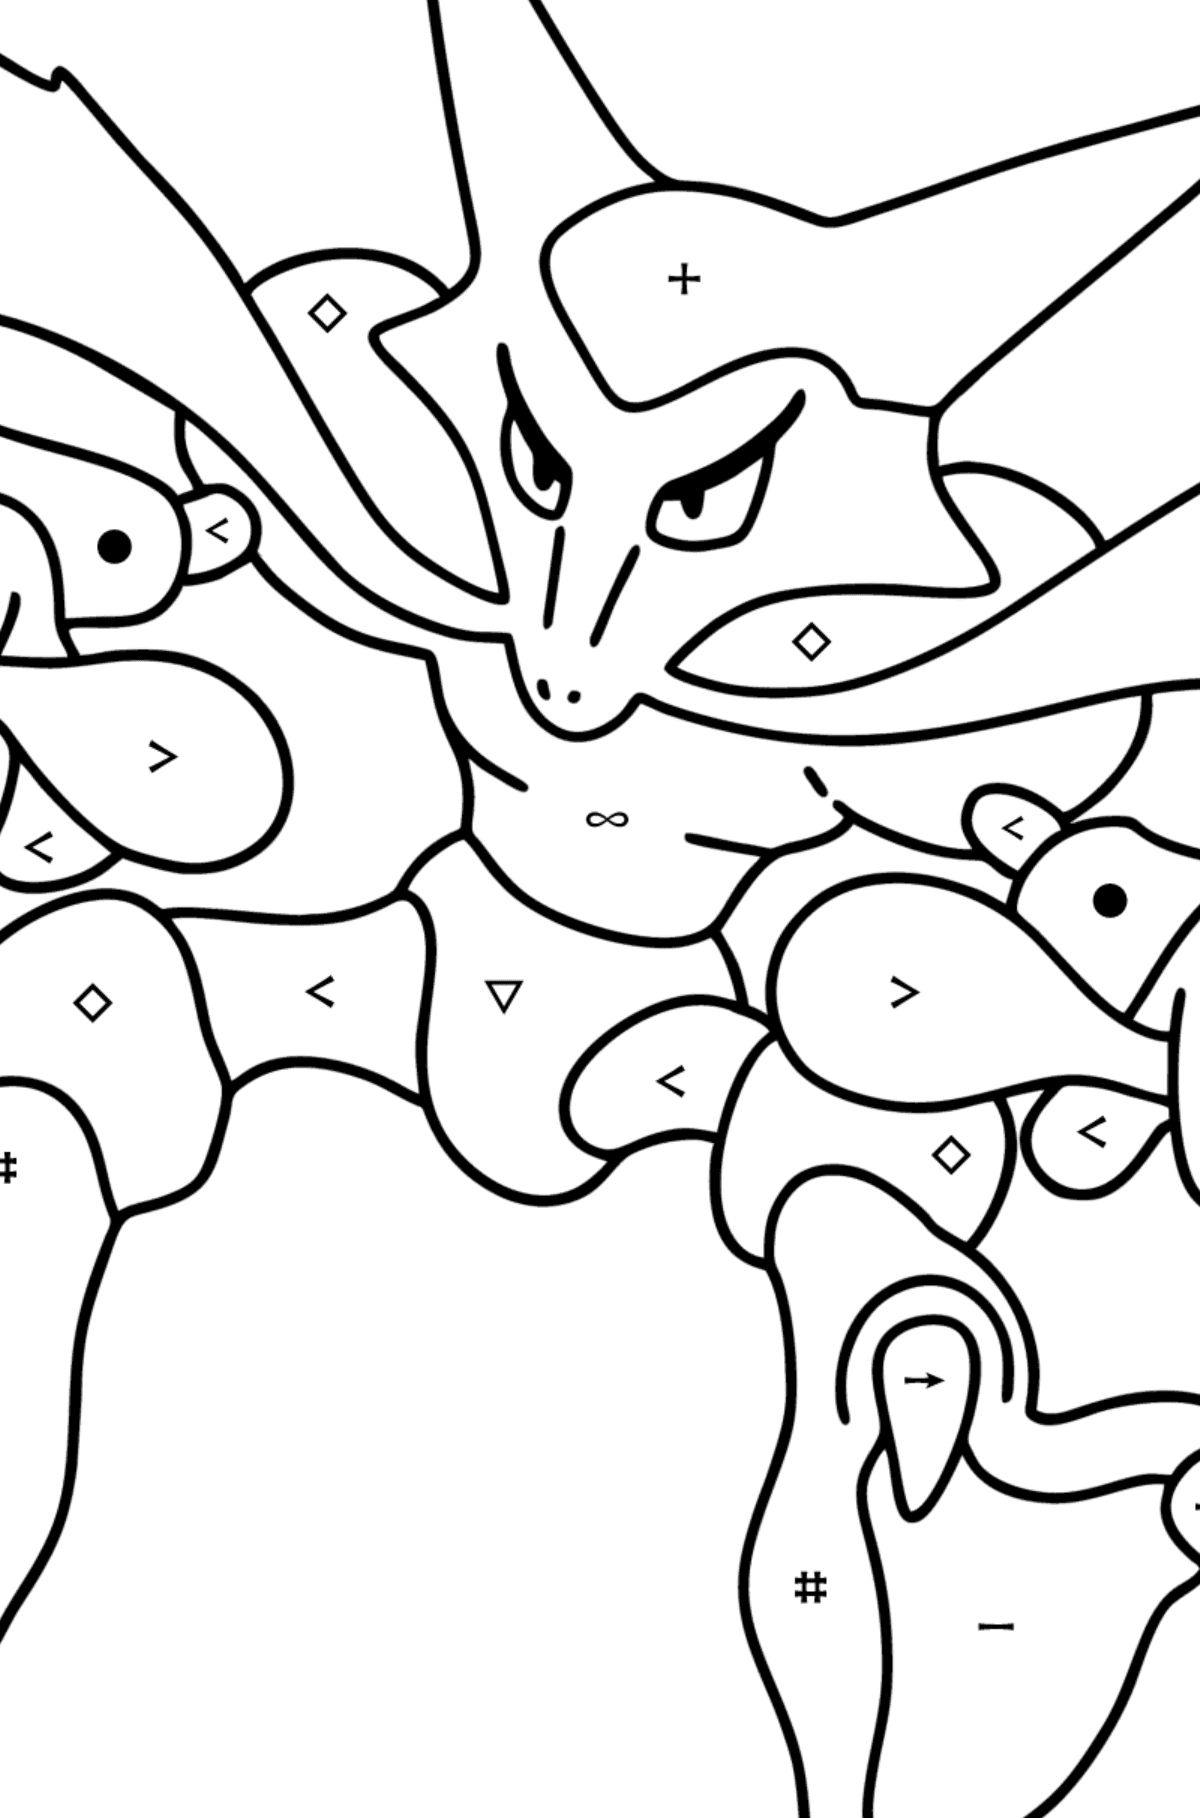 Coloring page Pokemon Go Alakazam - Coloring by Symbols for Kids